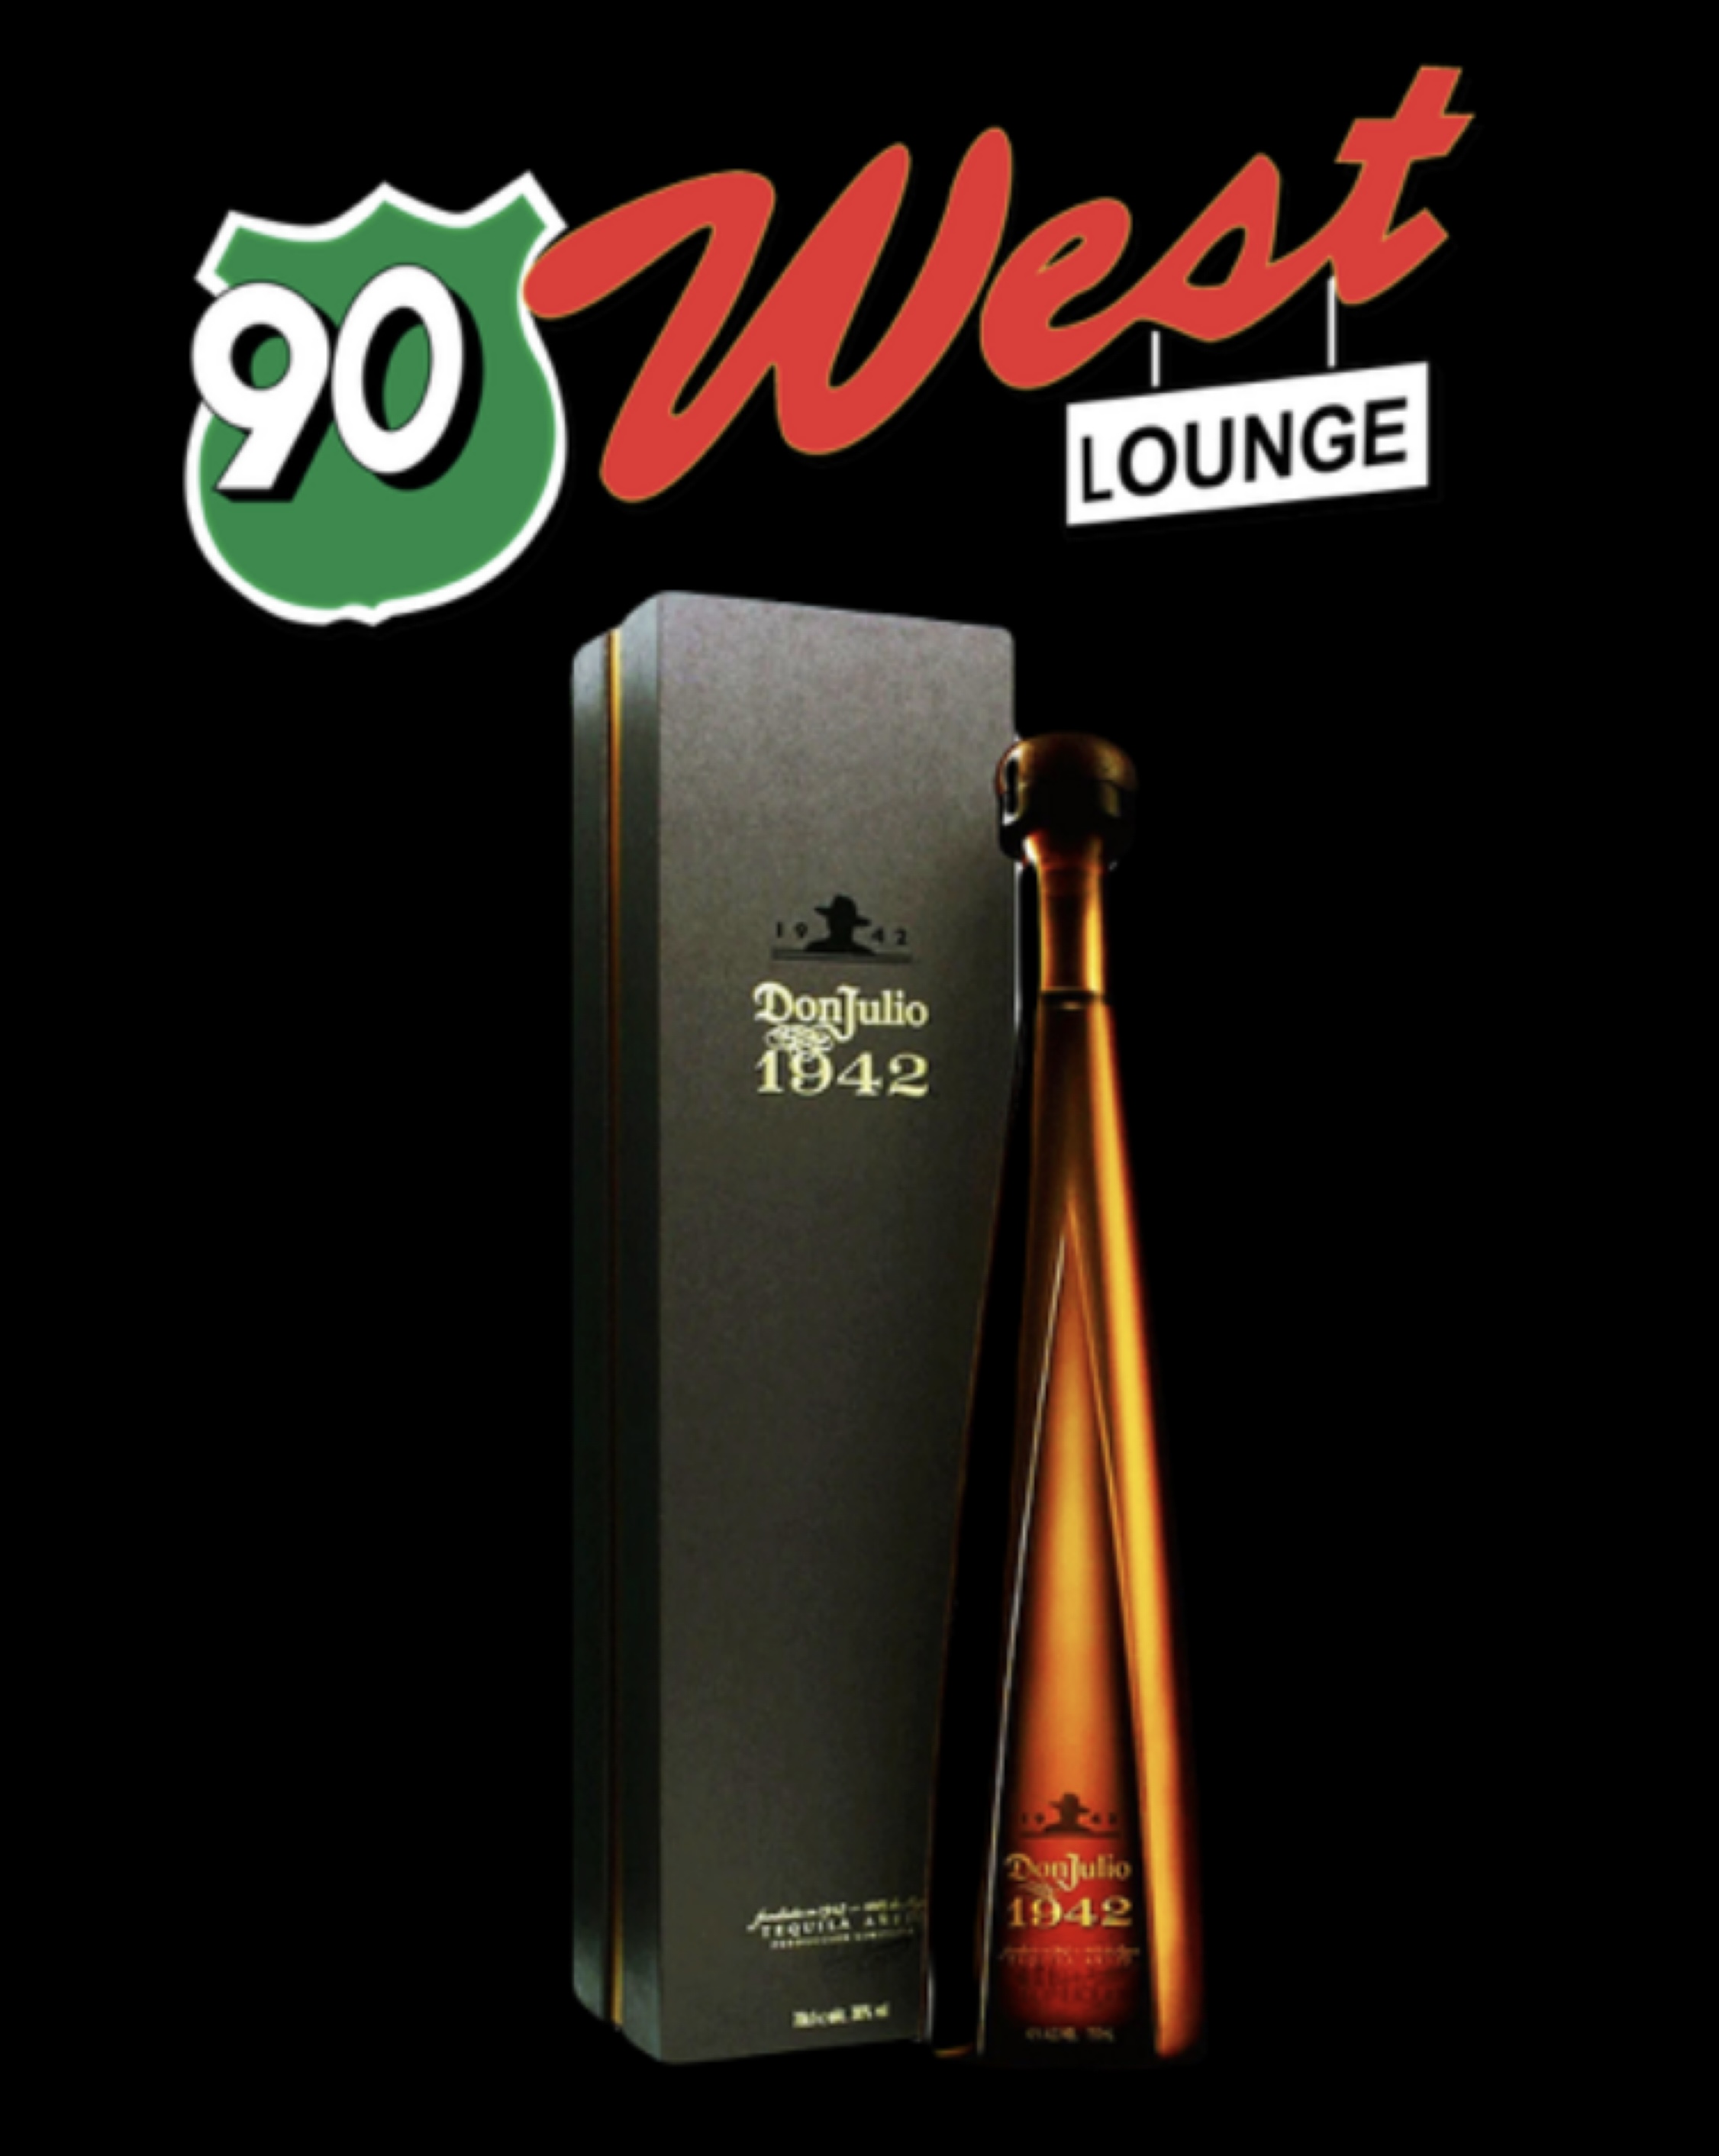 Don Julio 1942 tall thin bottle with the box it comes in. 90 West Logo..